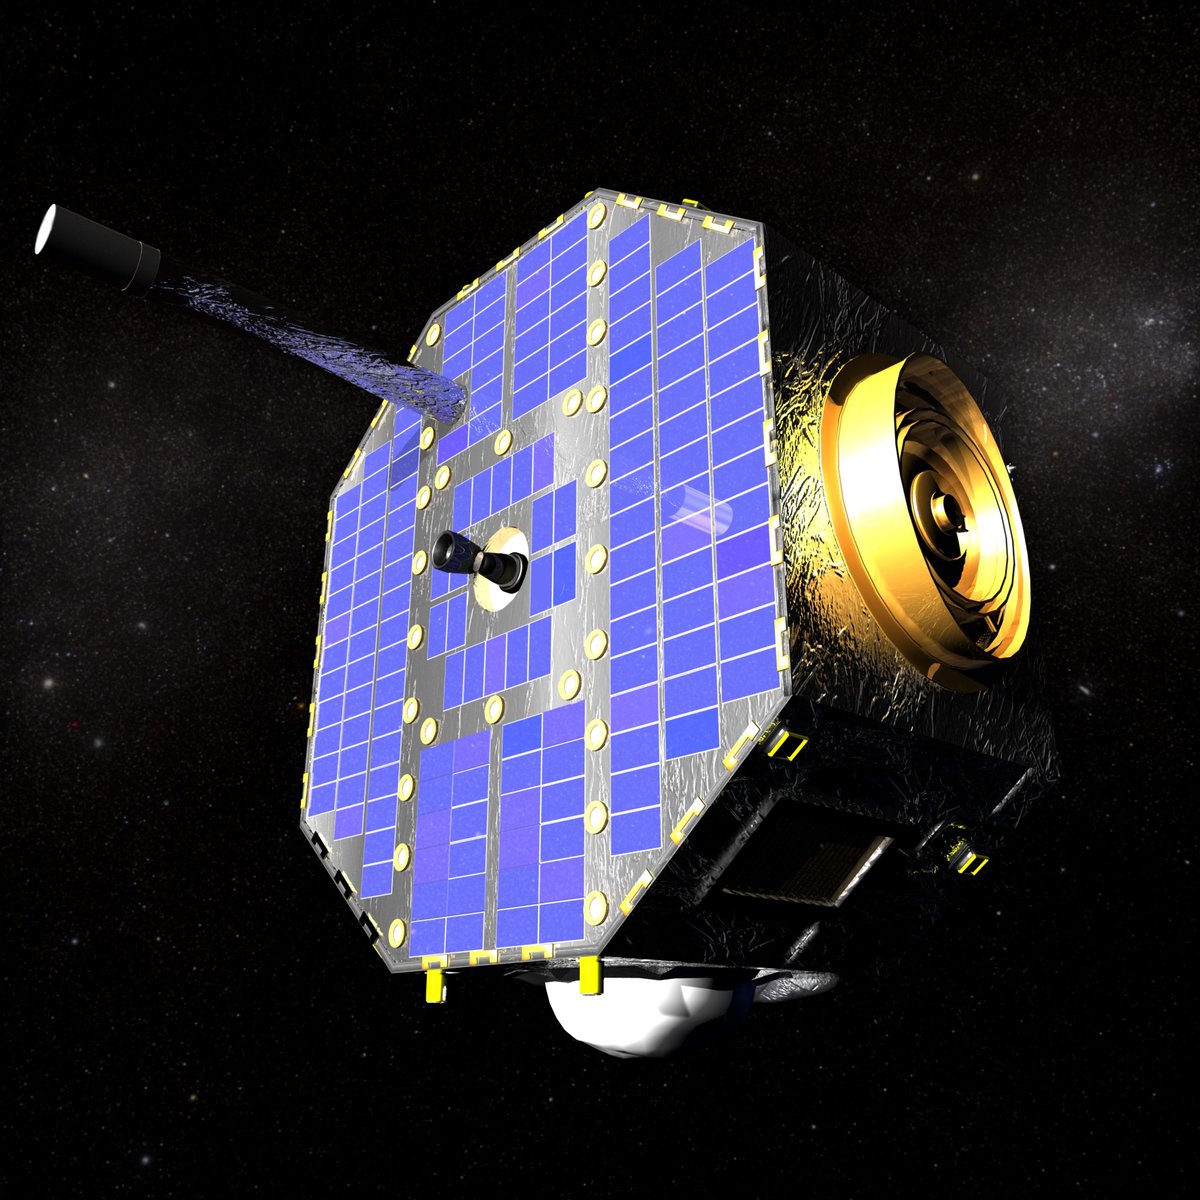 With the help of the reboot, NASA returned the old probe to service